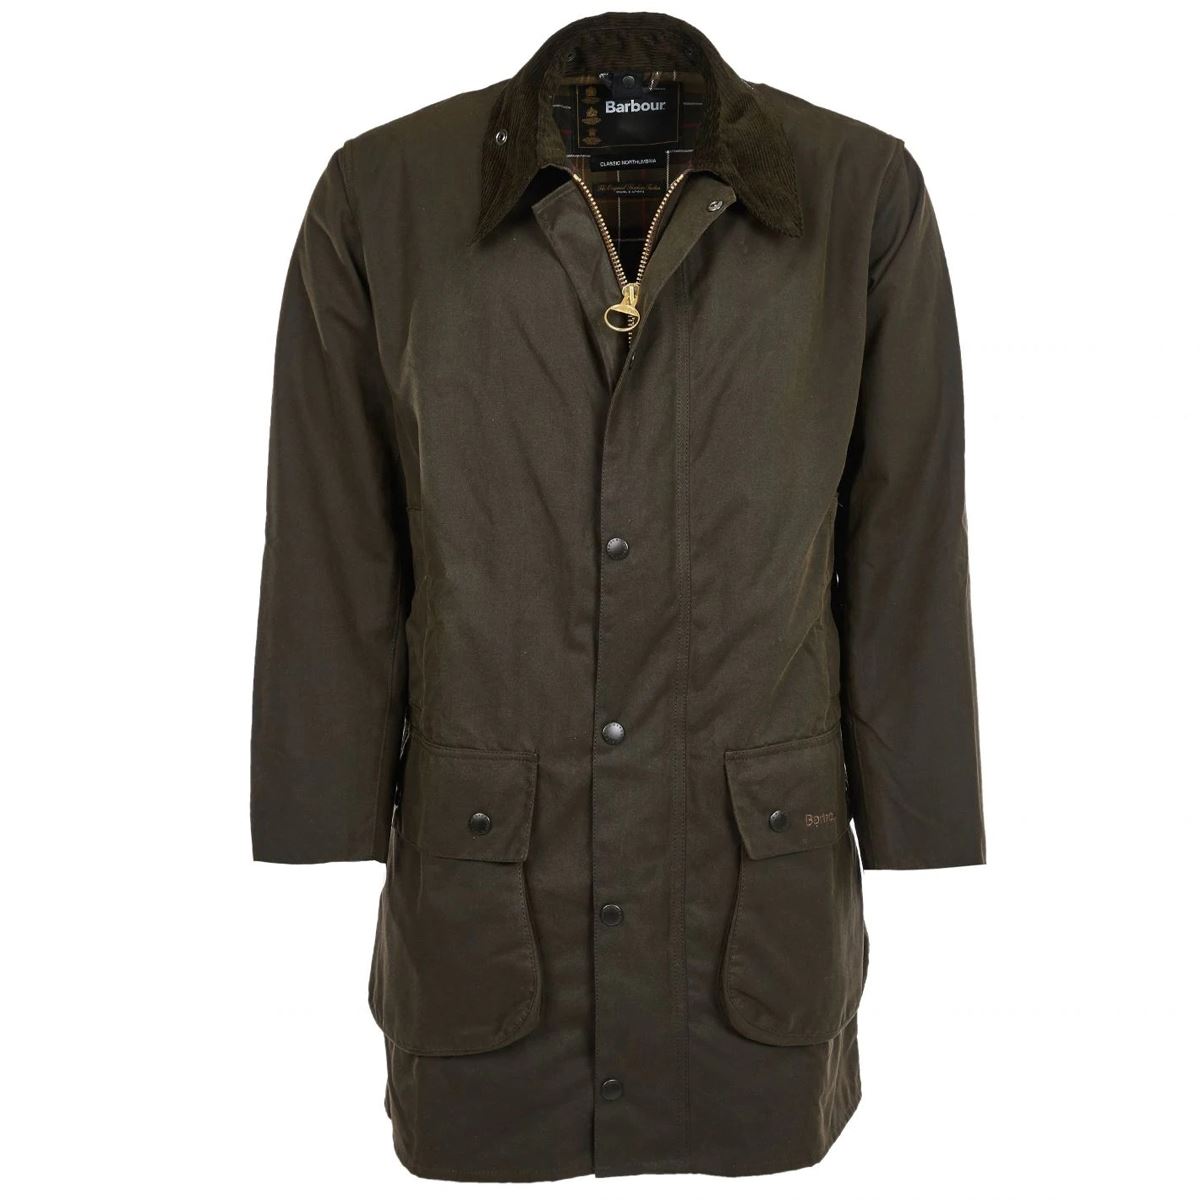 What is the length of the Barbour Northumbria Wax Jacket for men?